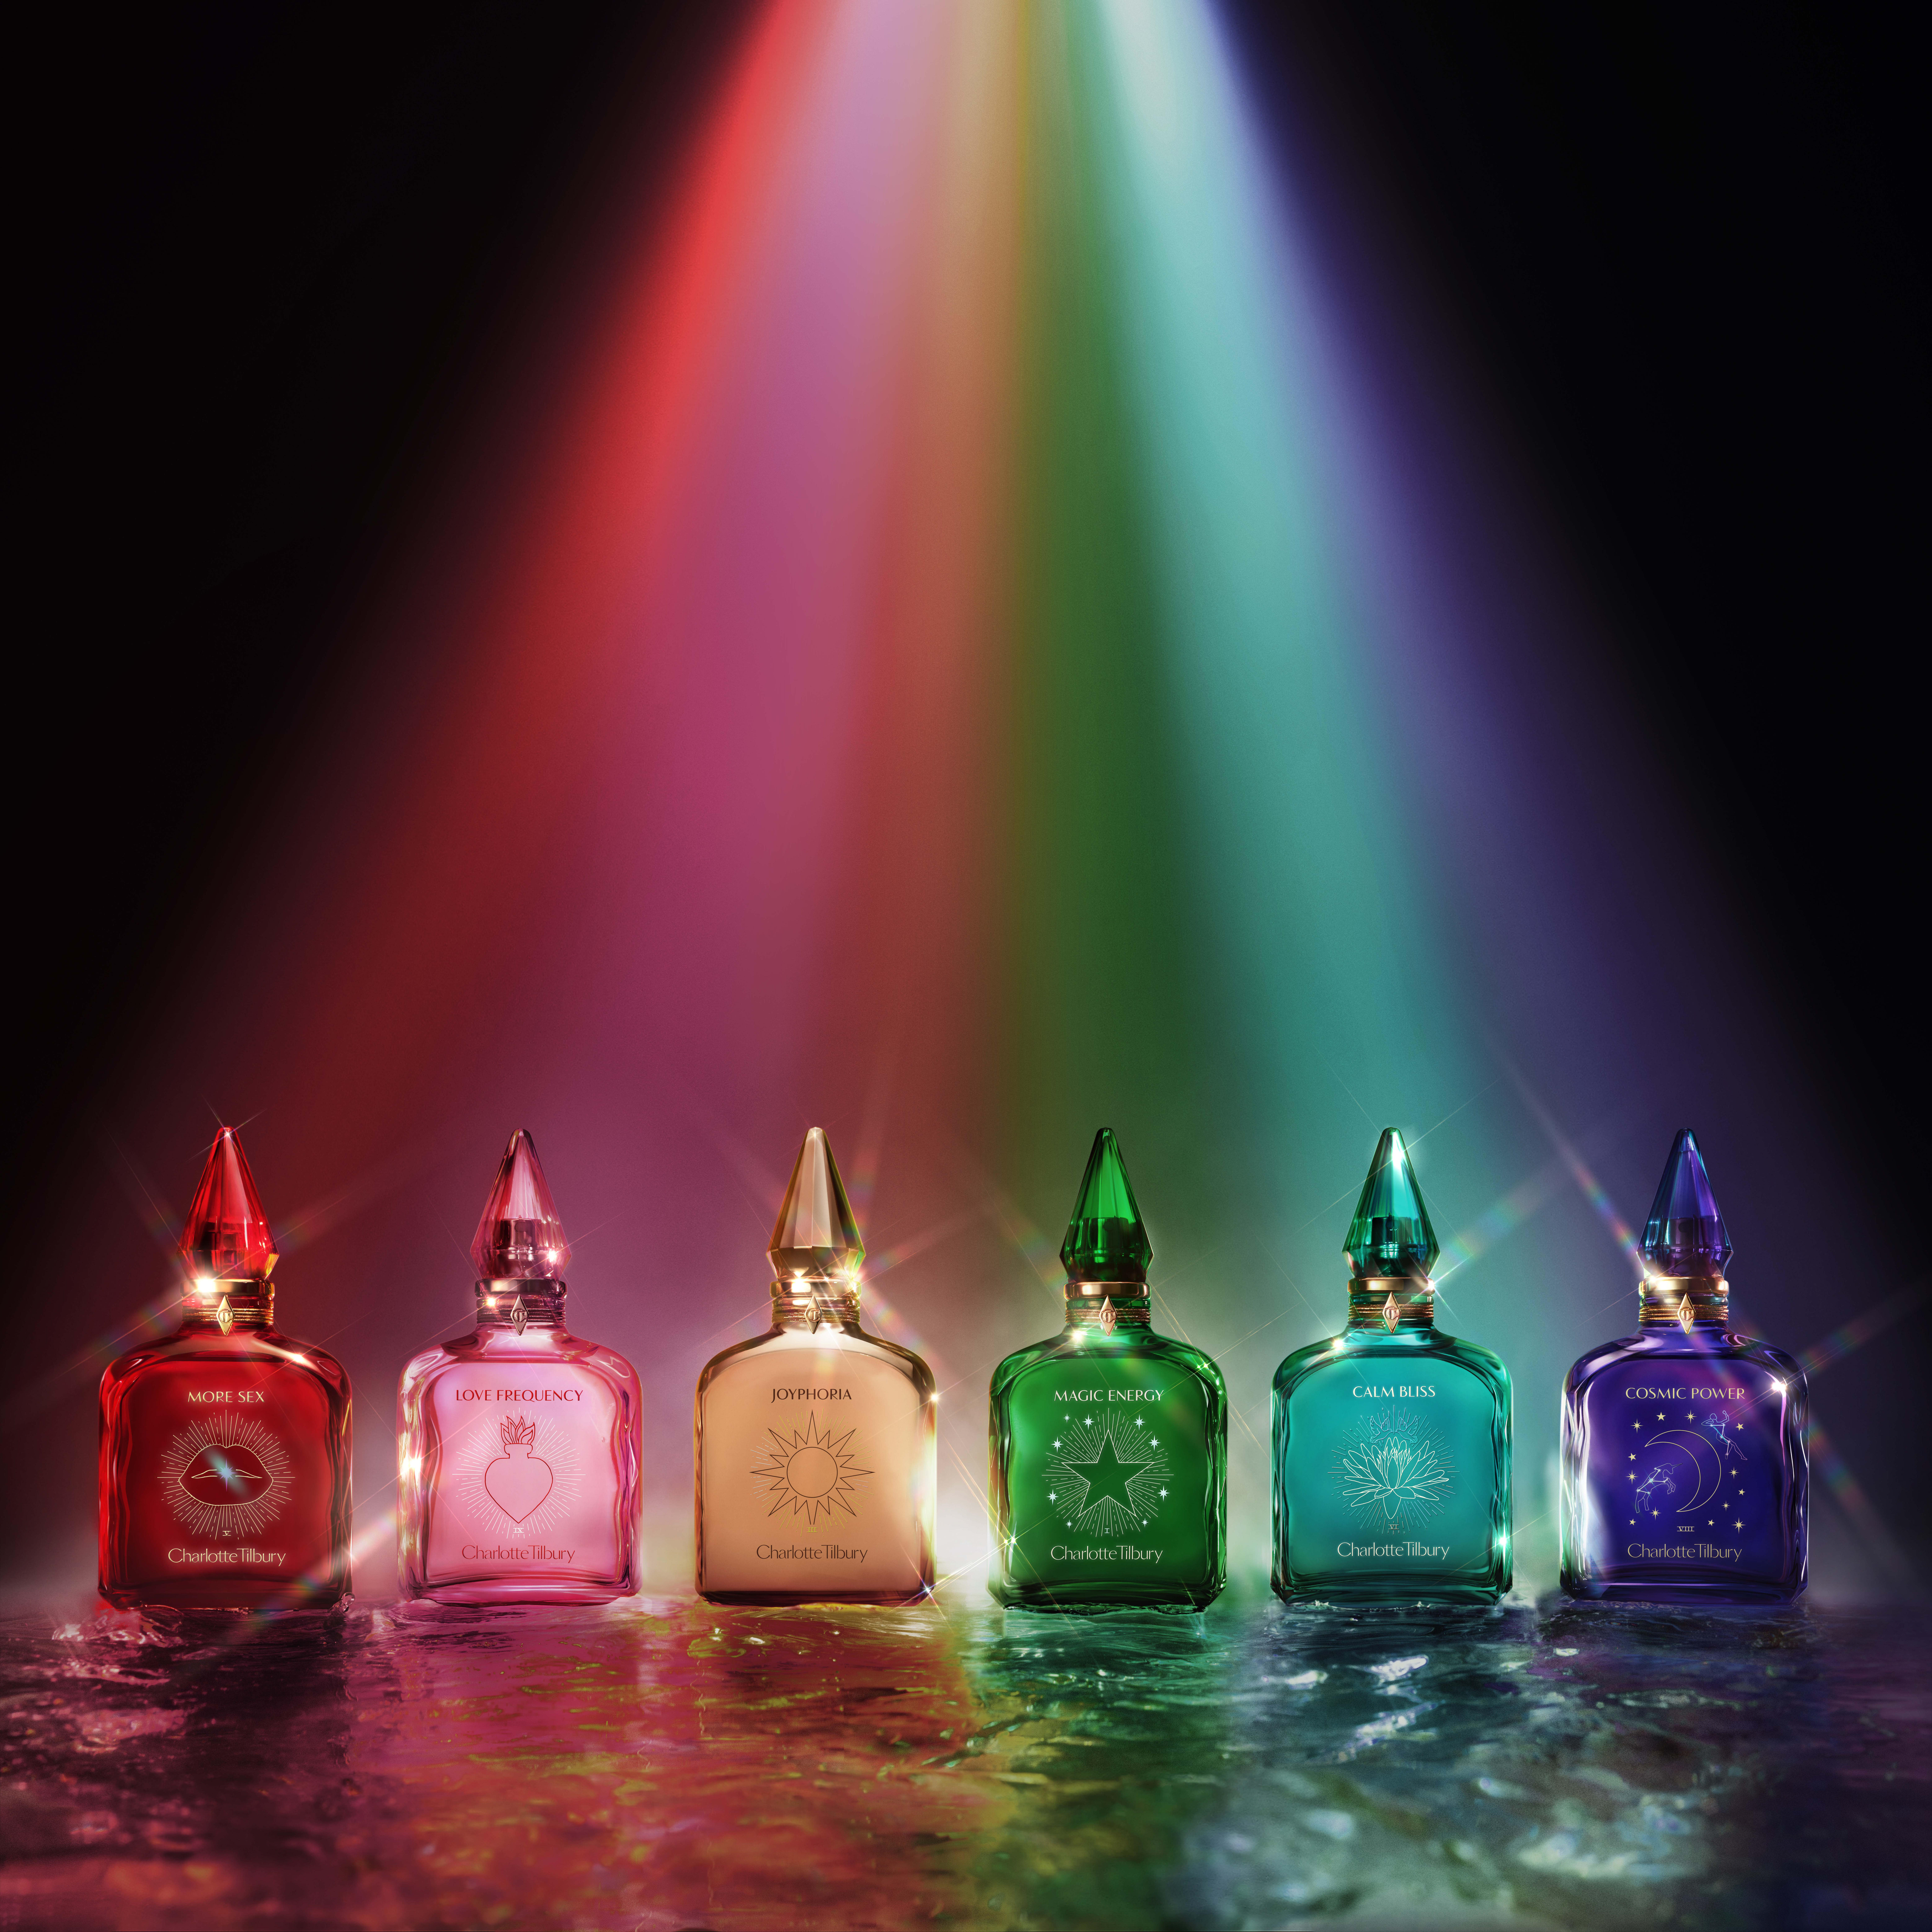 Rainbow spotlights shining on Charlotte's 6 fragrances from the Fragrance Collection of Emotions